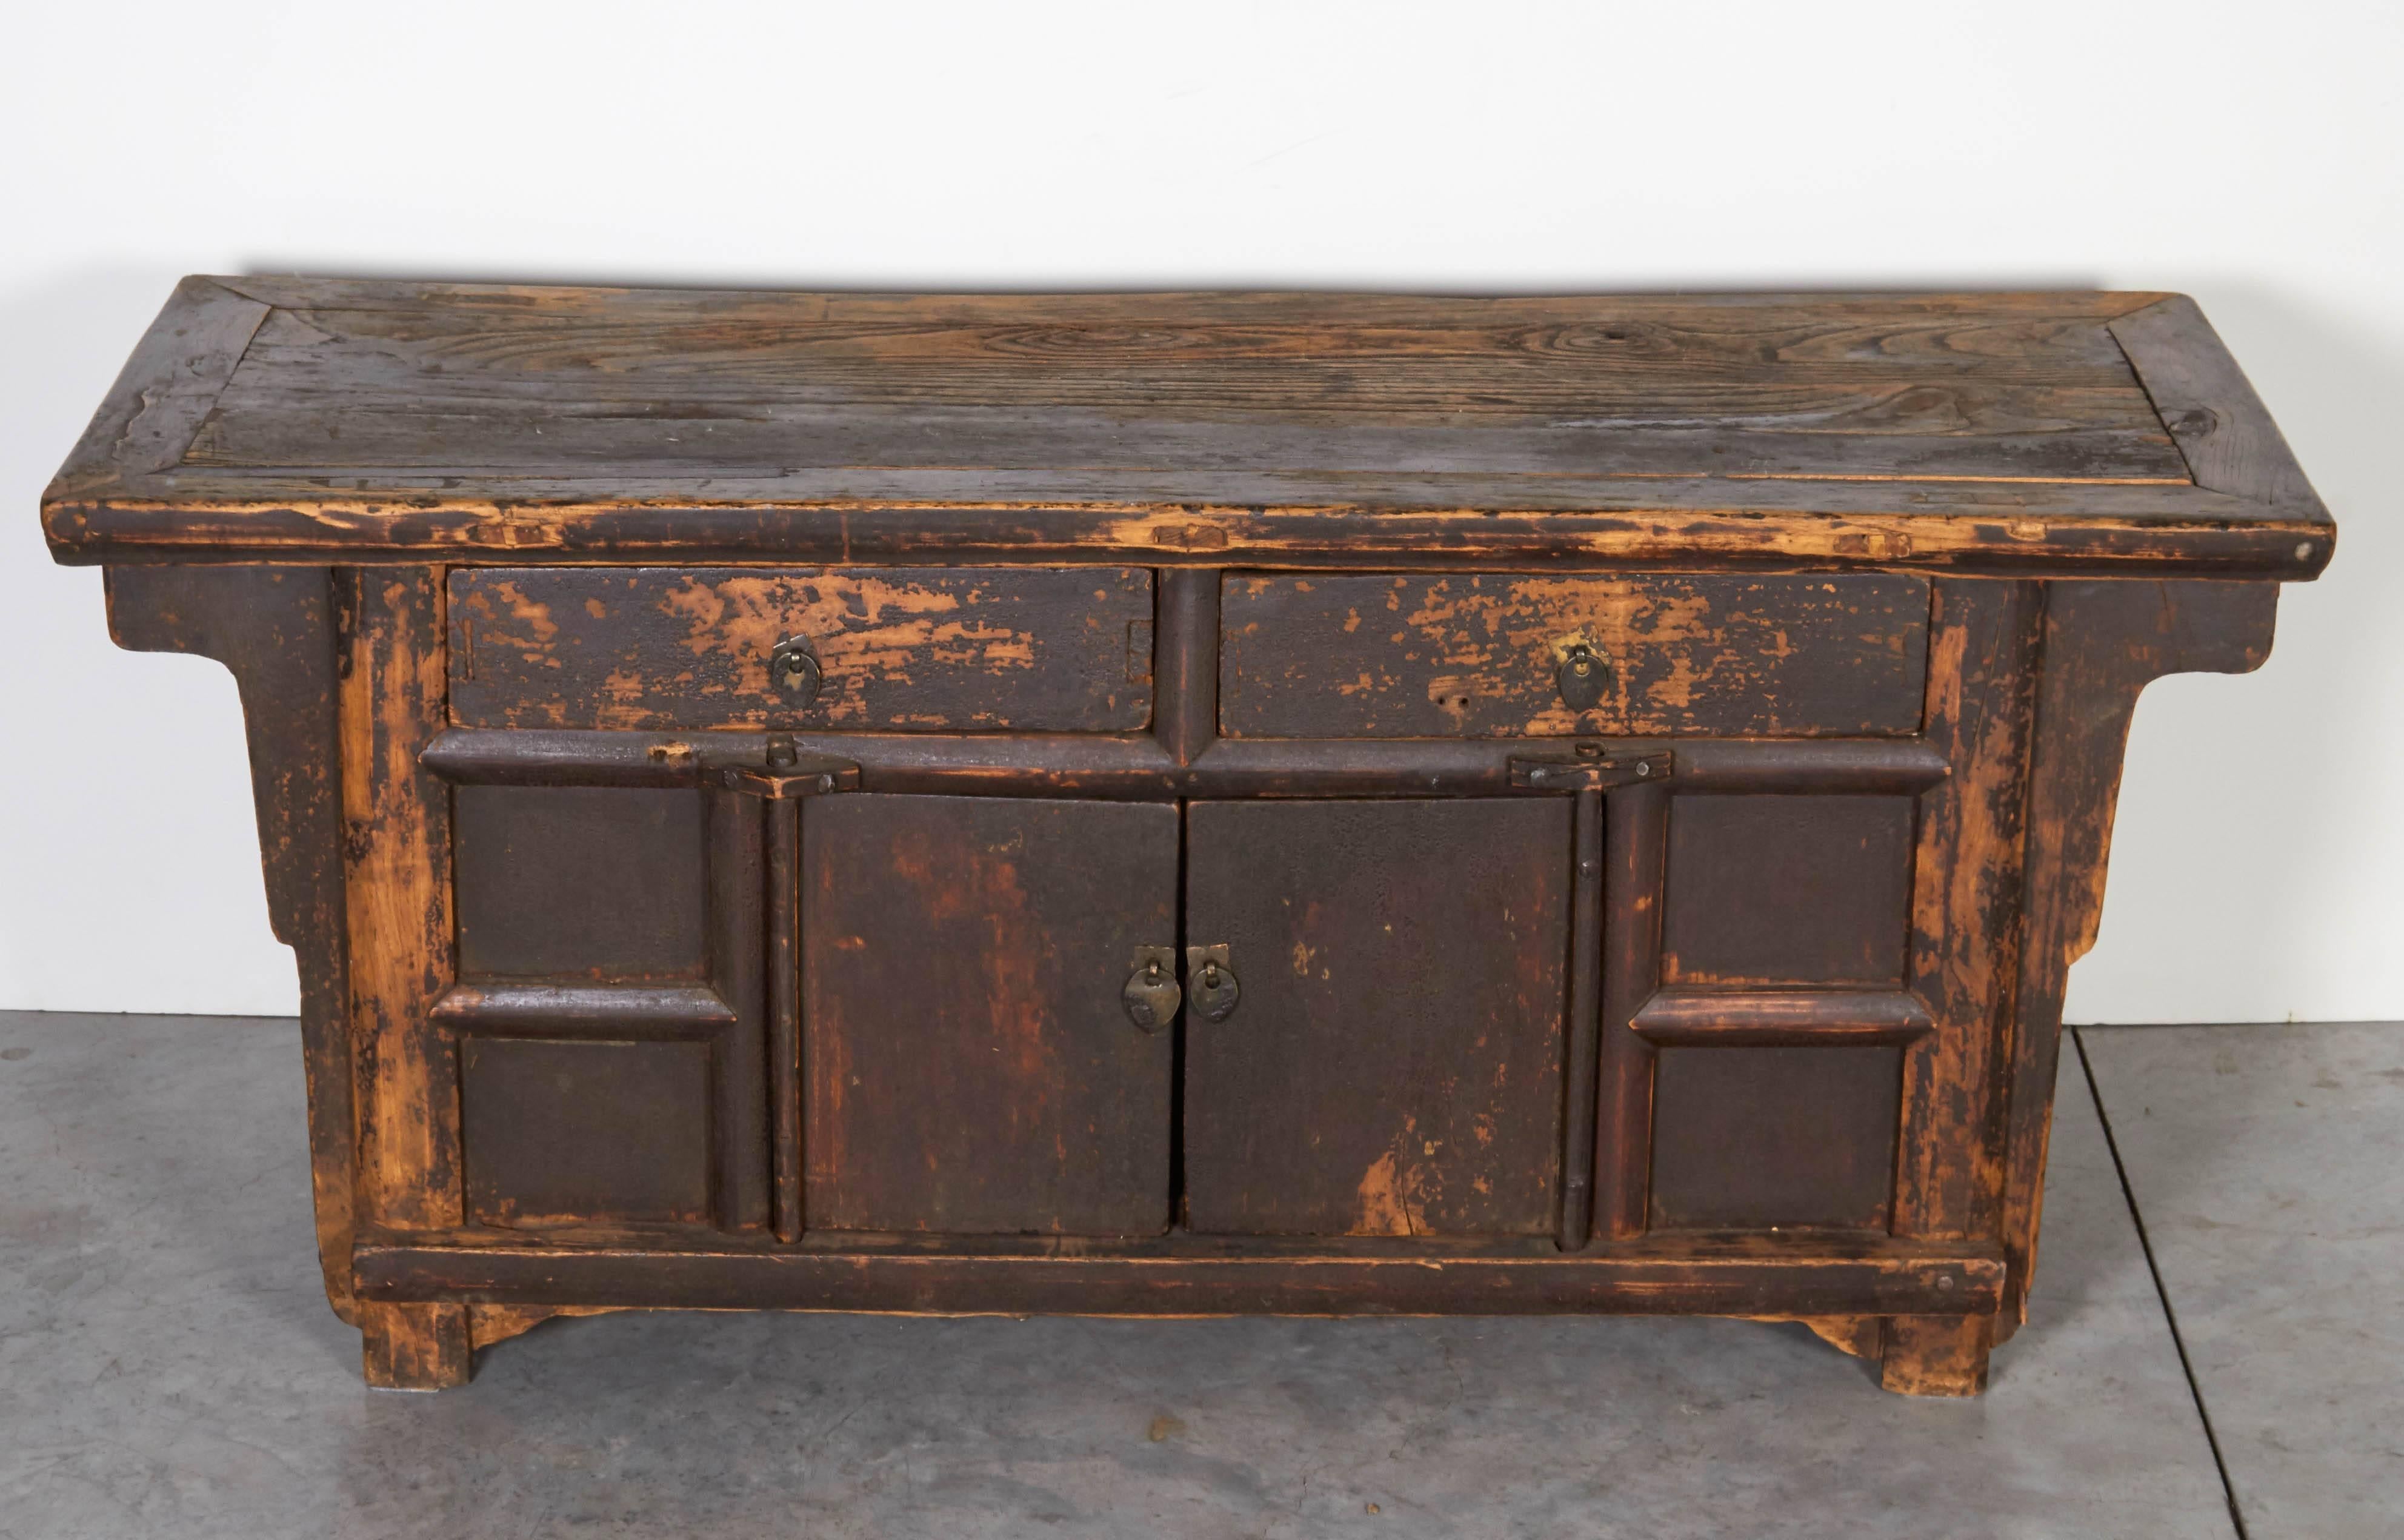 A nicely proportioned 19th century Chinese cabinet, beautifully finished with a warm patina and perfectly suited to be a coffee table or a low entryway piece. This cabinet also works great as a pedestal for displaying a Buddha or other object. From